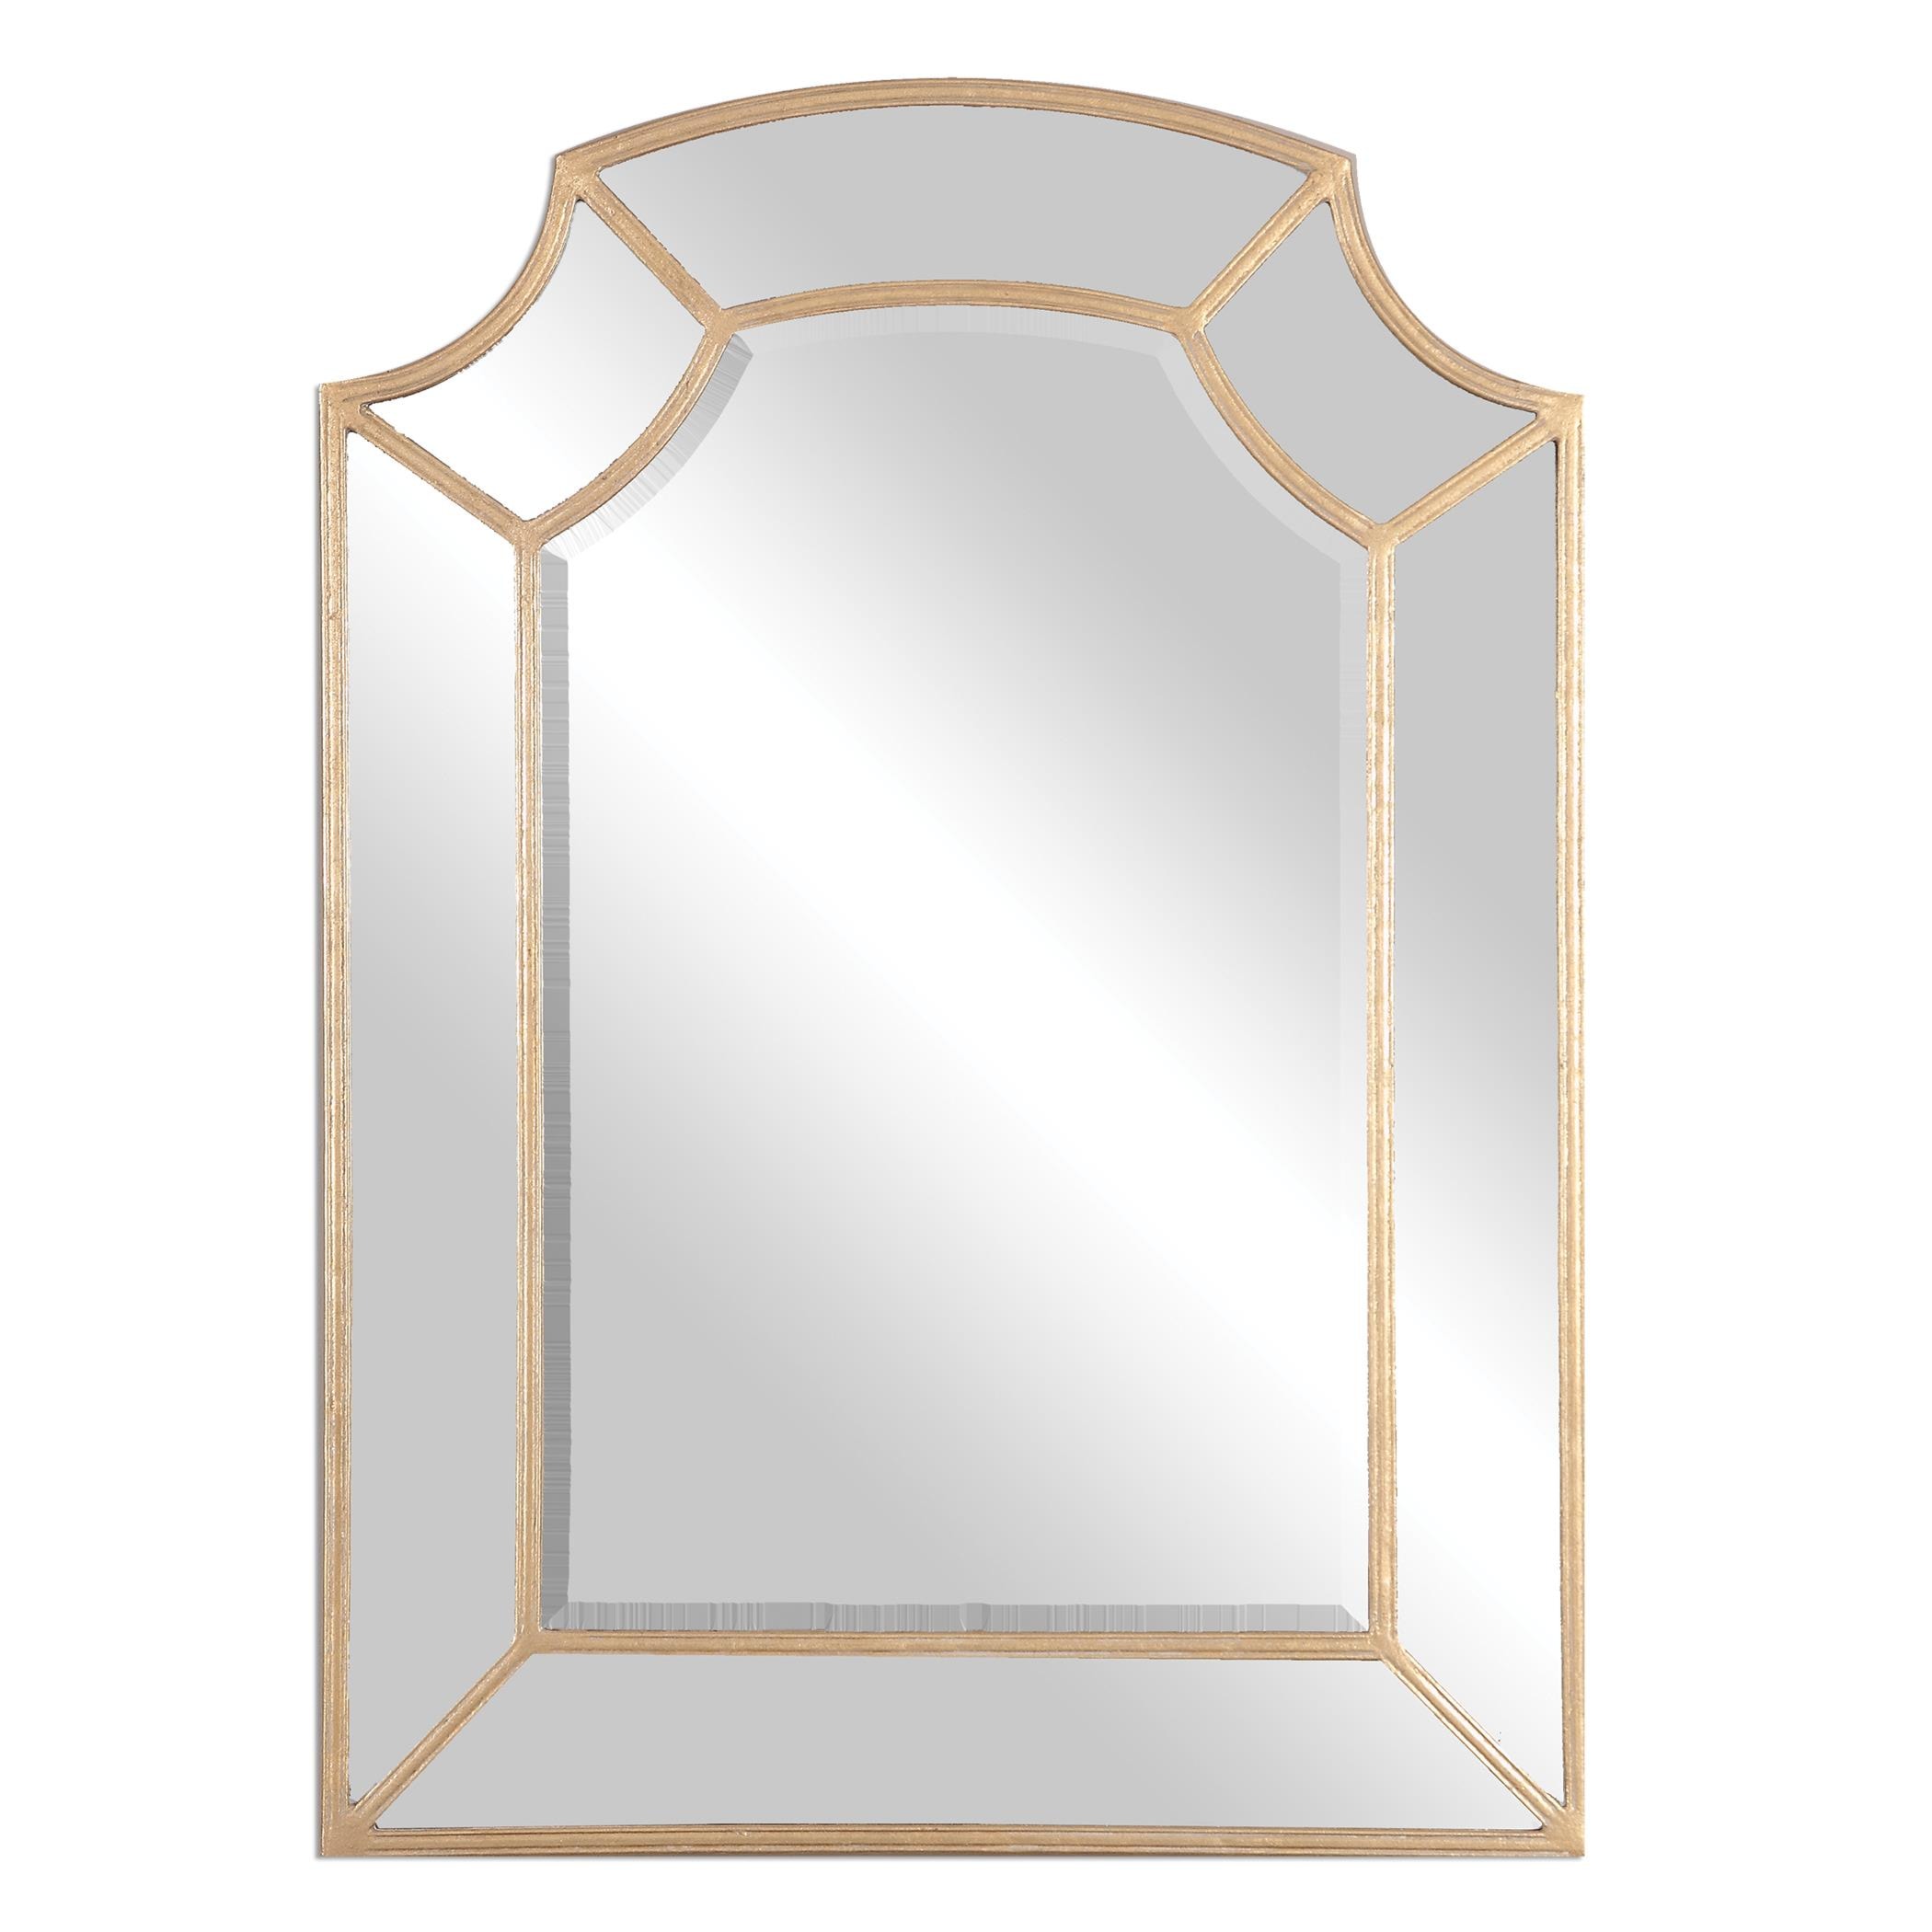 Uttermost Arched Mirrors Francoli Gold Arch Mirror Adcock Furniture  Mirrors Wall